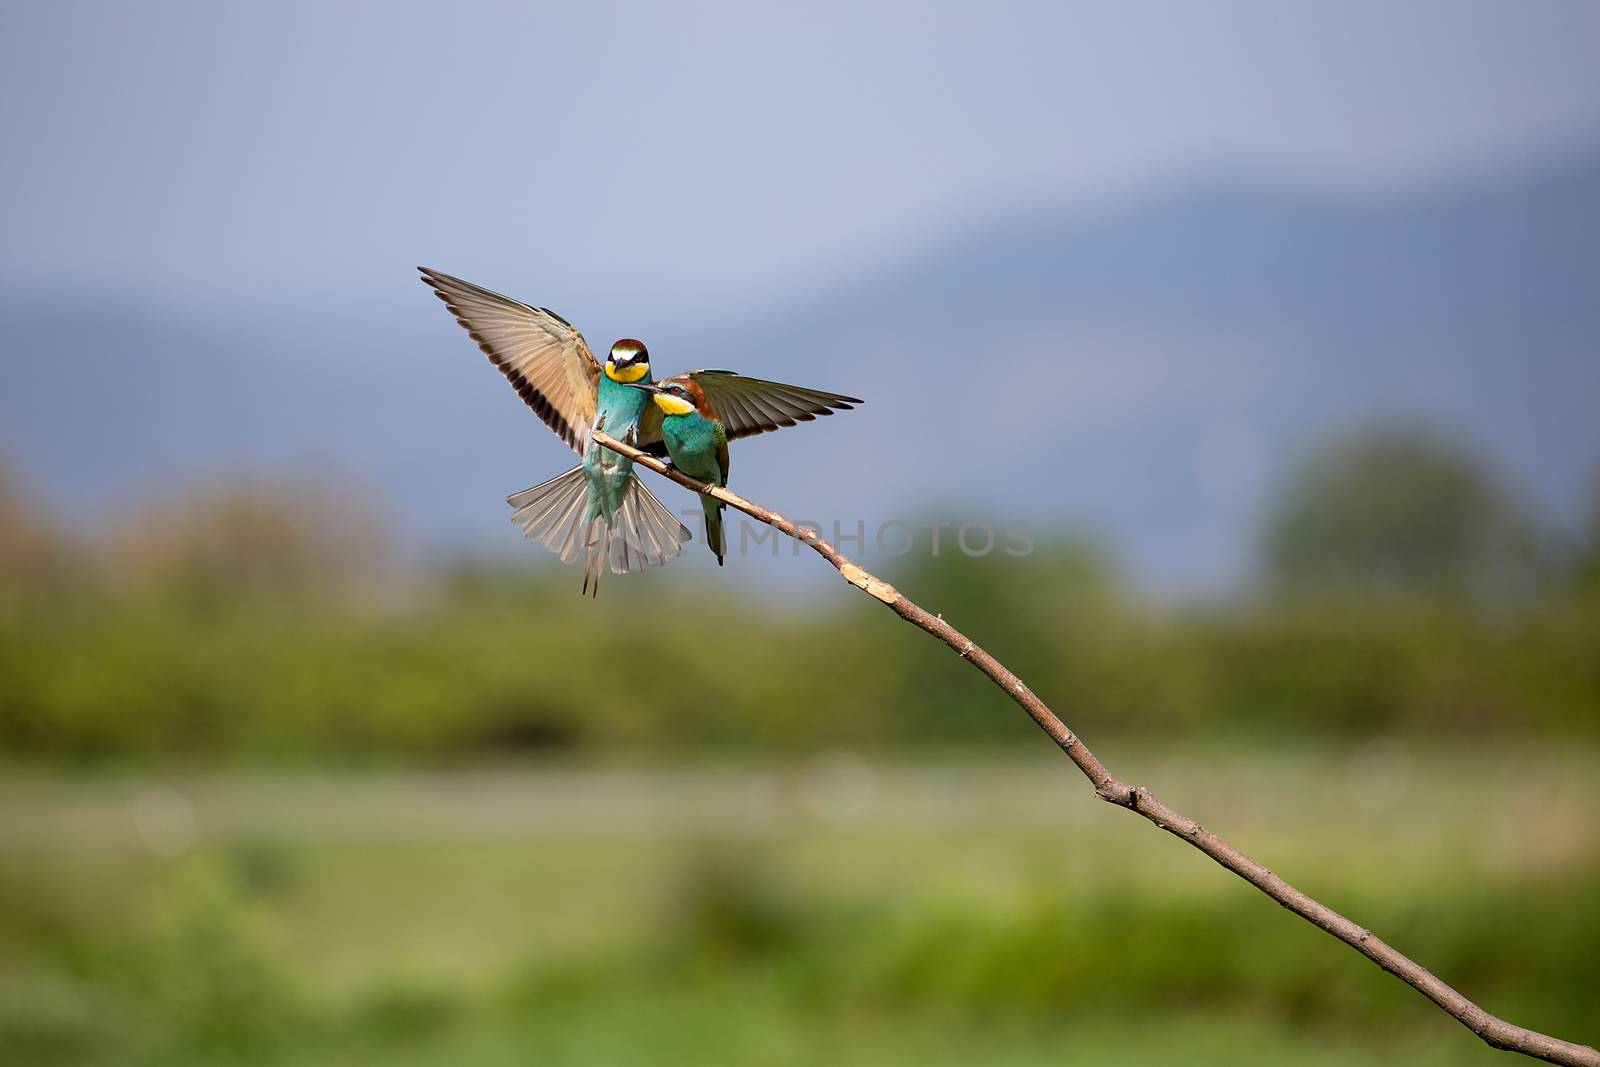 European Bee-eater couple (Merops apiaster) on brunch by Tanja_g